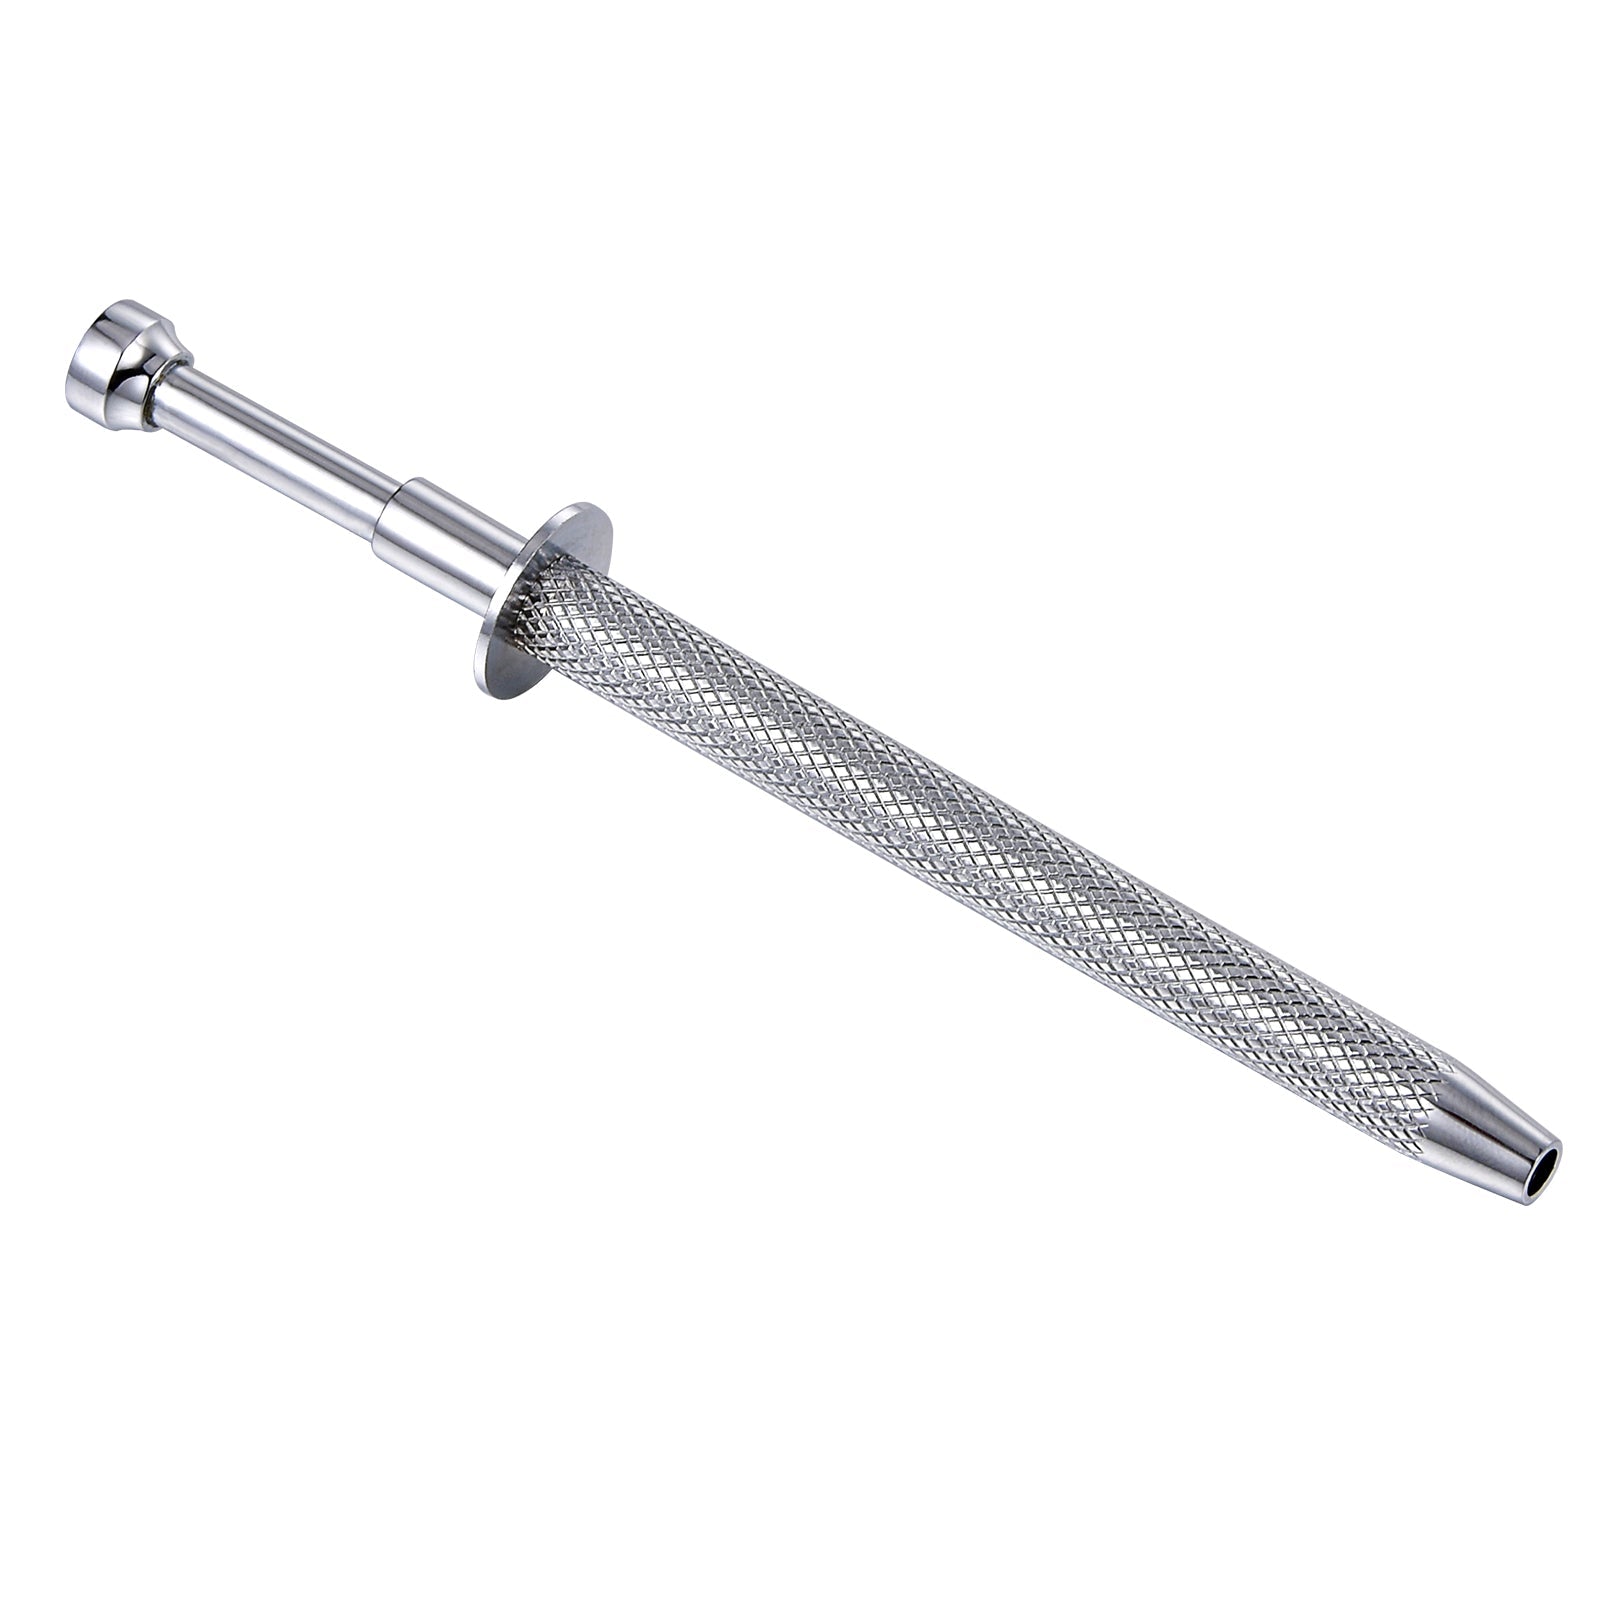 Piercing Ball Grabber Tool,Pick-Up Tool with 4 Prongs Professional Surgical  Steel Push in Syringe Type Quad Prong Small Bead Holder Grab Ball Catcher